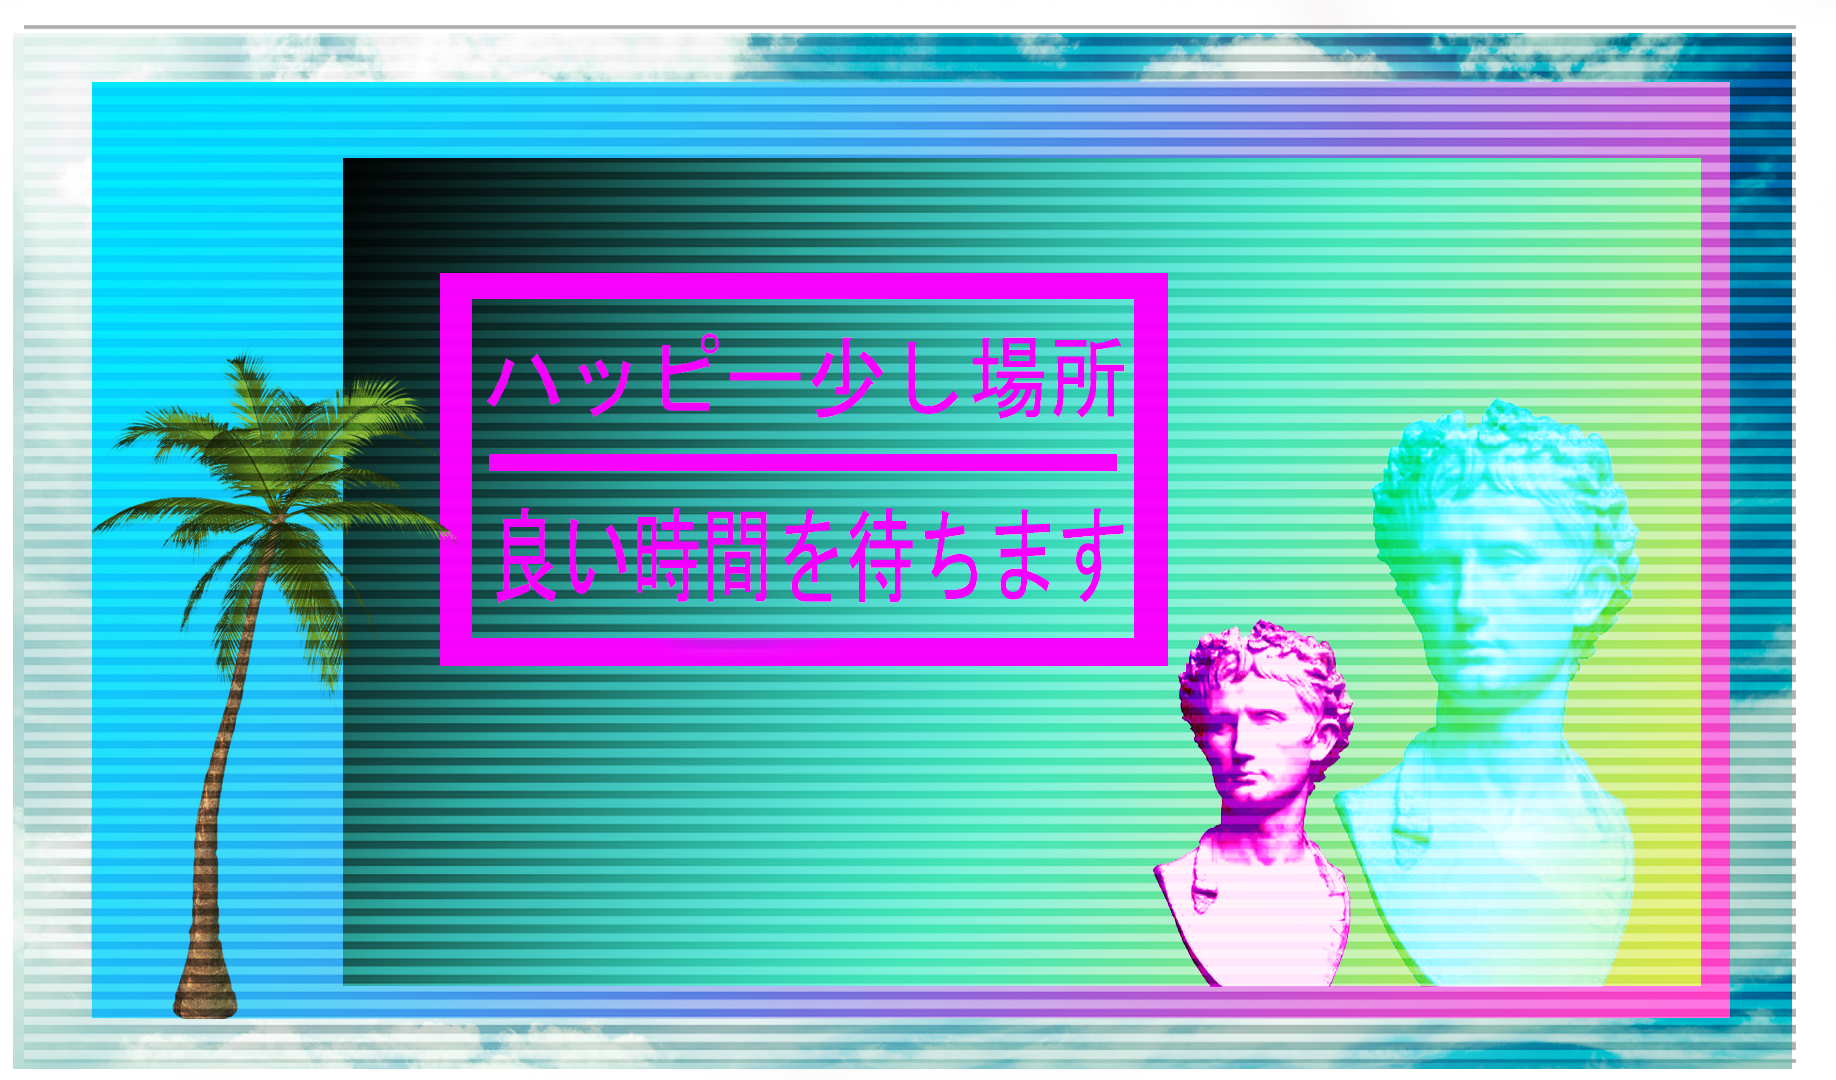 2mib, 1836x1080, First Vaporwave - Graphic Design Clipart (1836x1080), Png Download